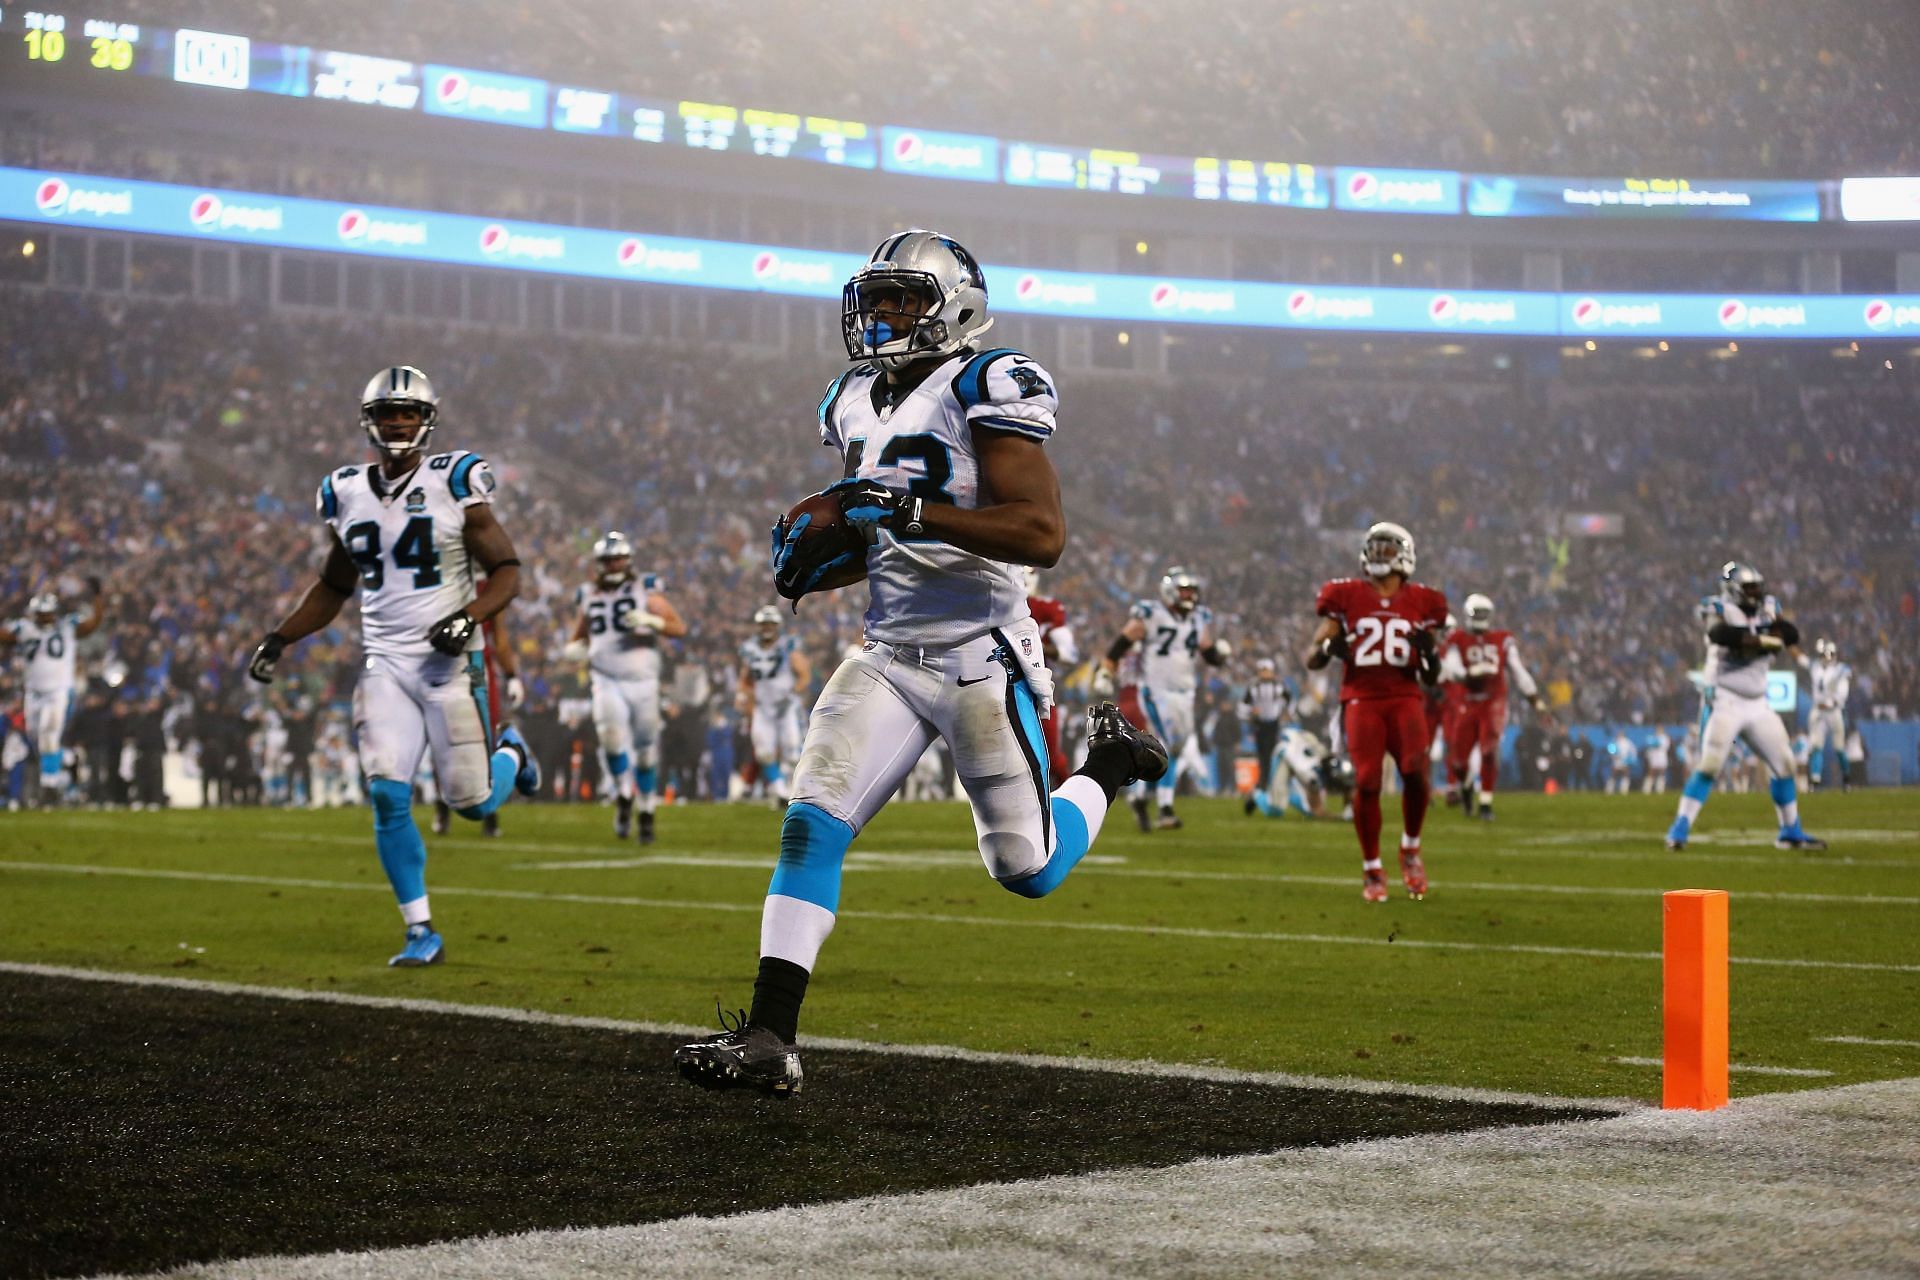 Fozzy Whittaker&#039;s 39-yard touchdown reception gave Carolina the lead for good (Photo: Getty)